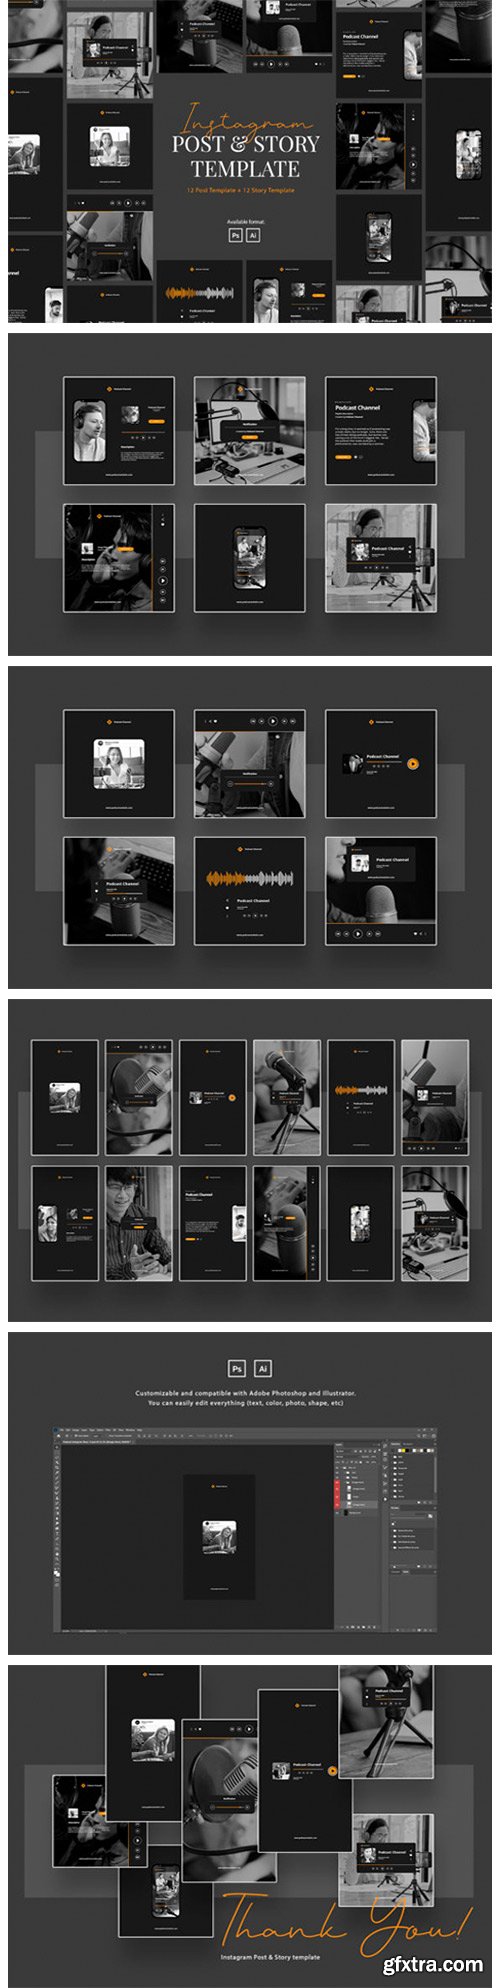 Podcast Instagram Post & Story Template 6216809